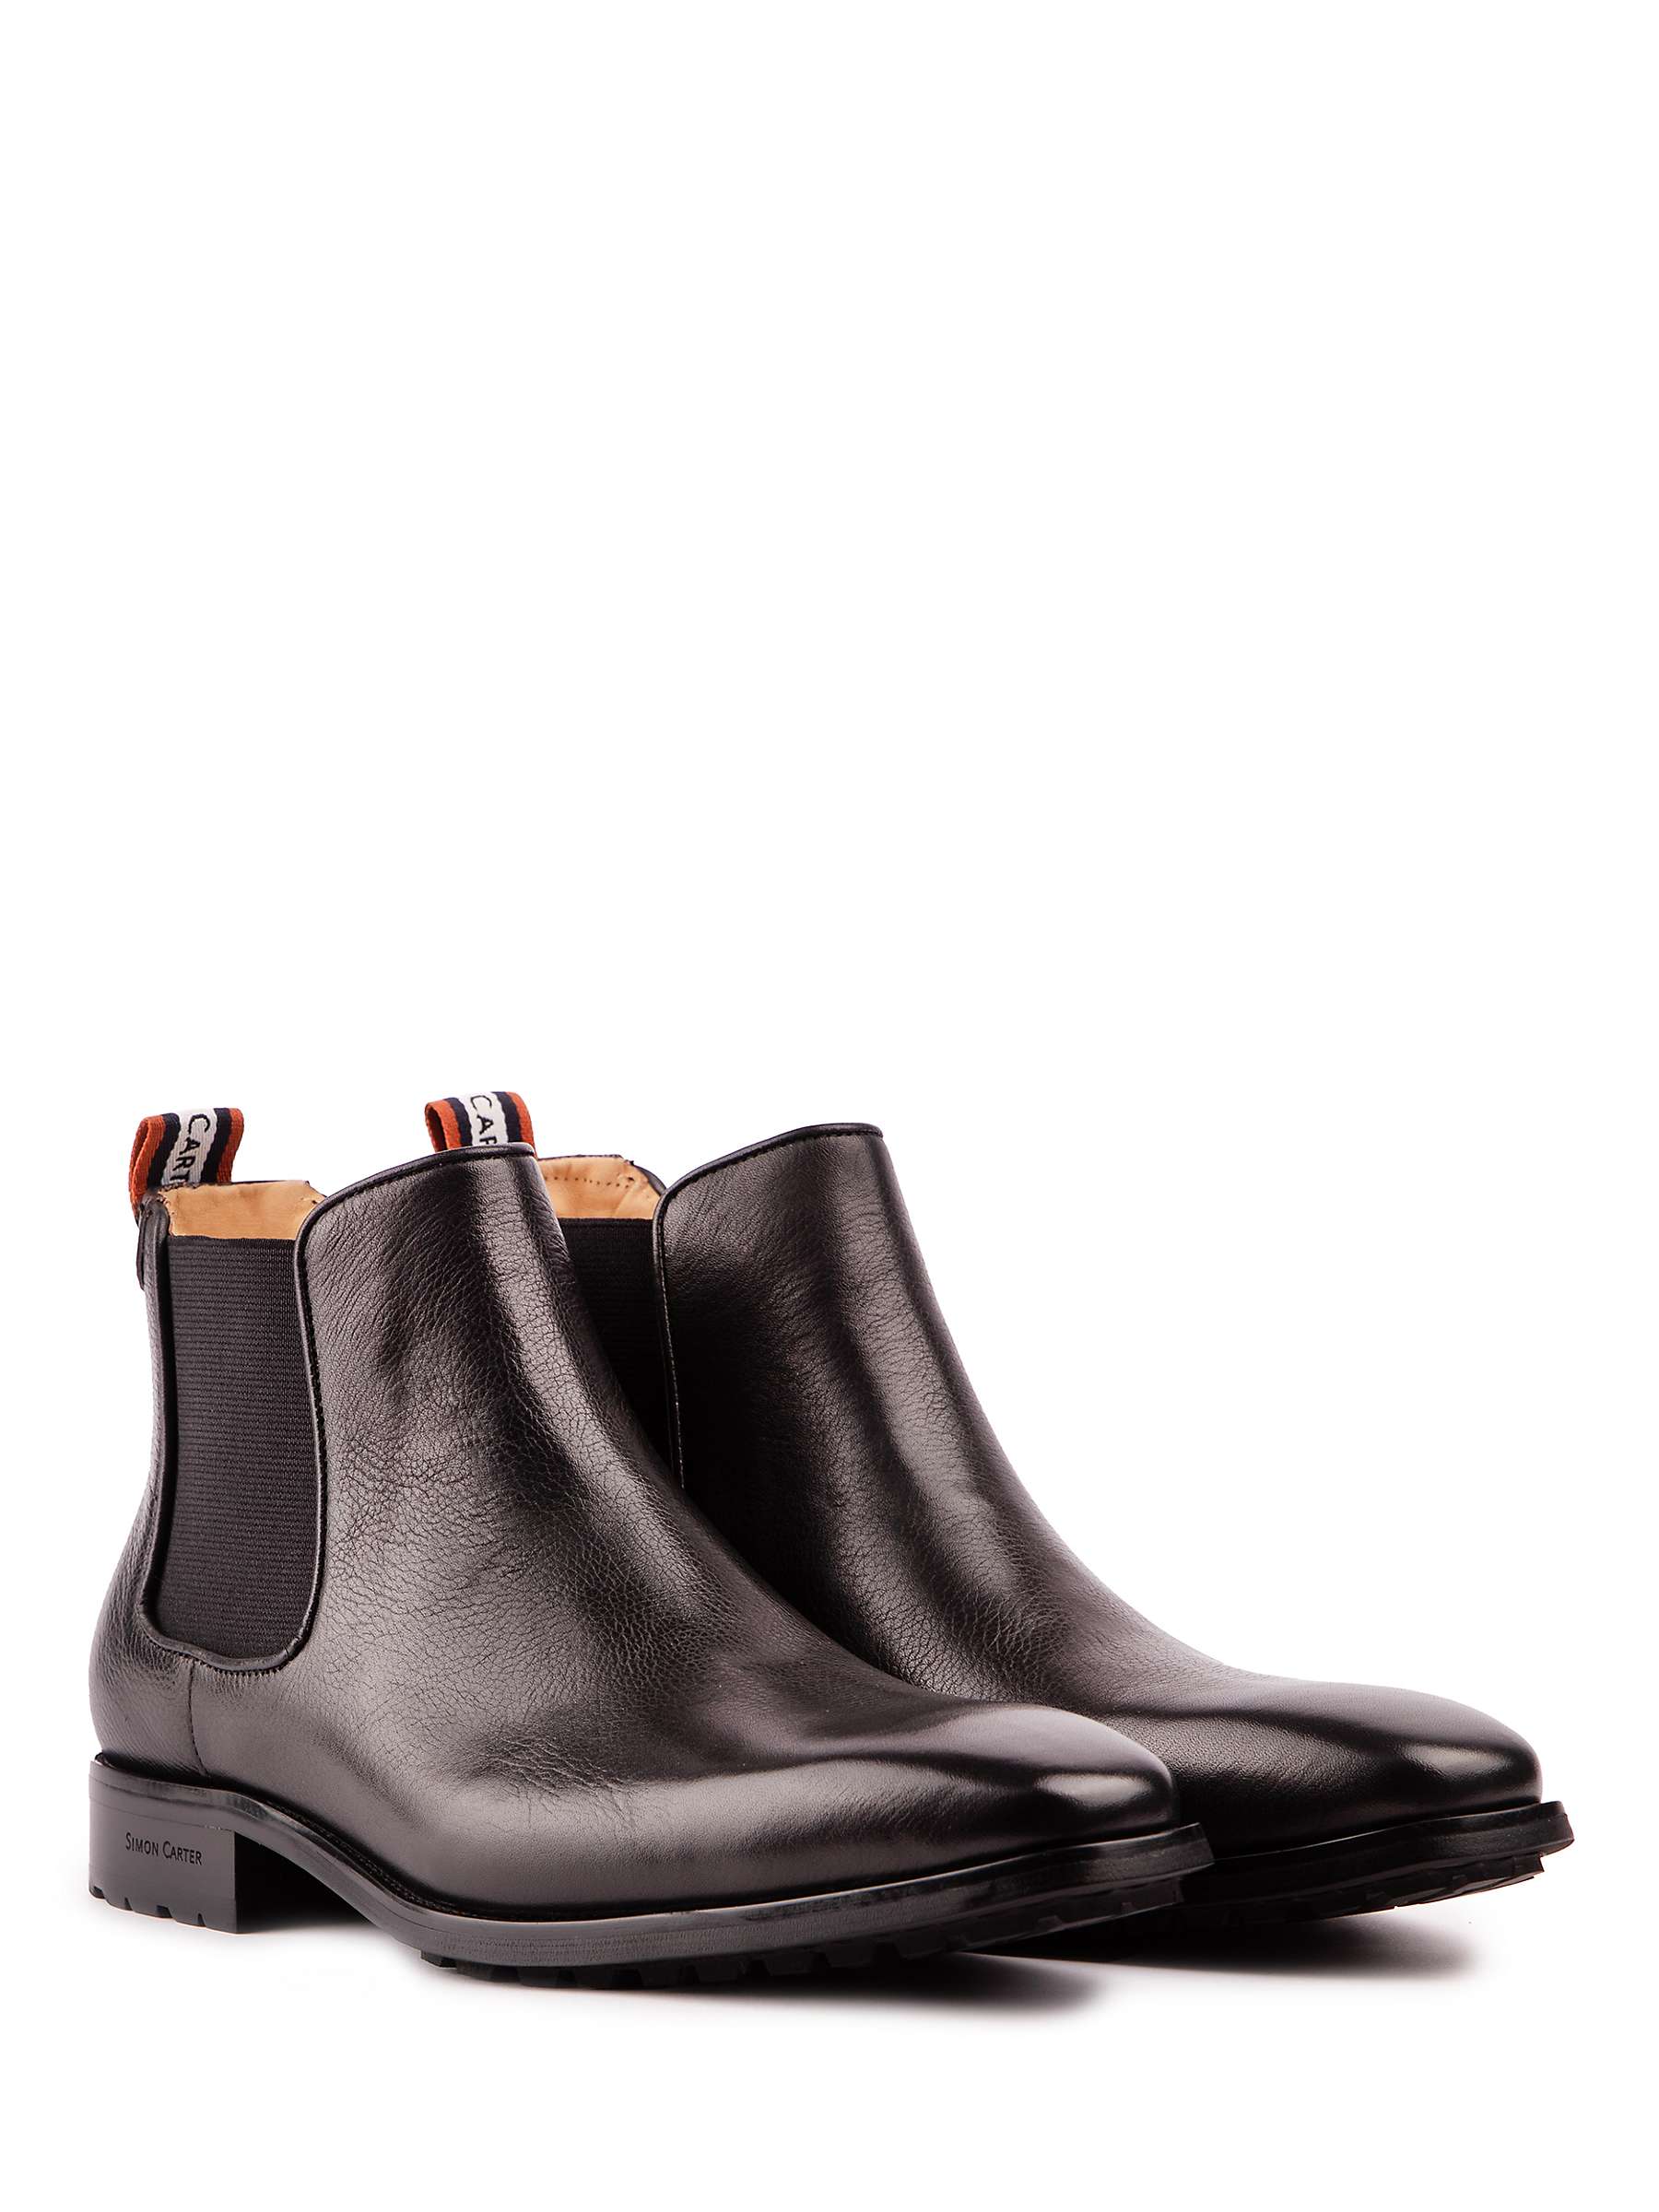 Buy Simon Carter Clover Leather Chelsea Boots Online at johnlewis.com